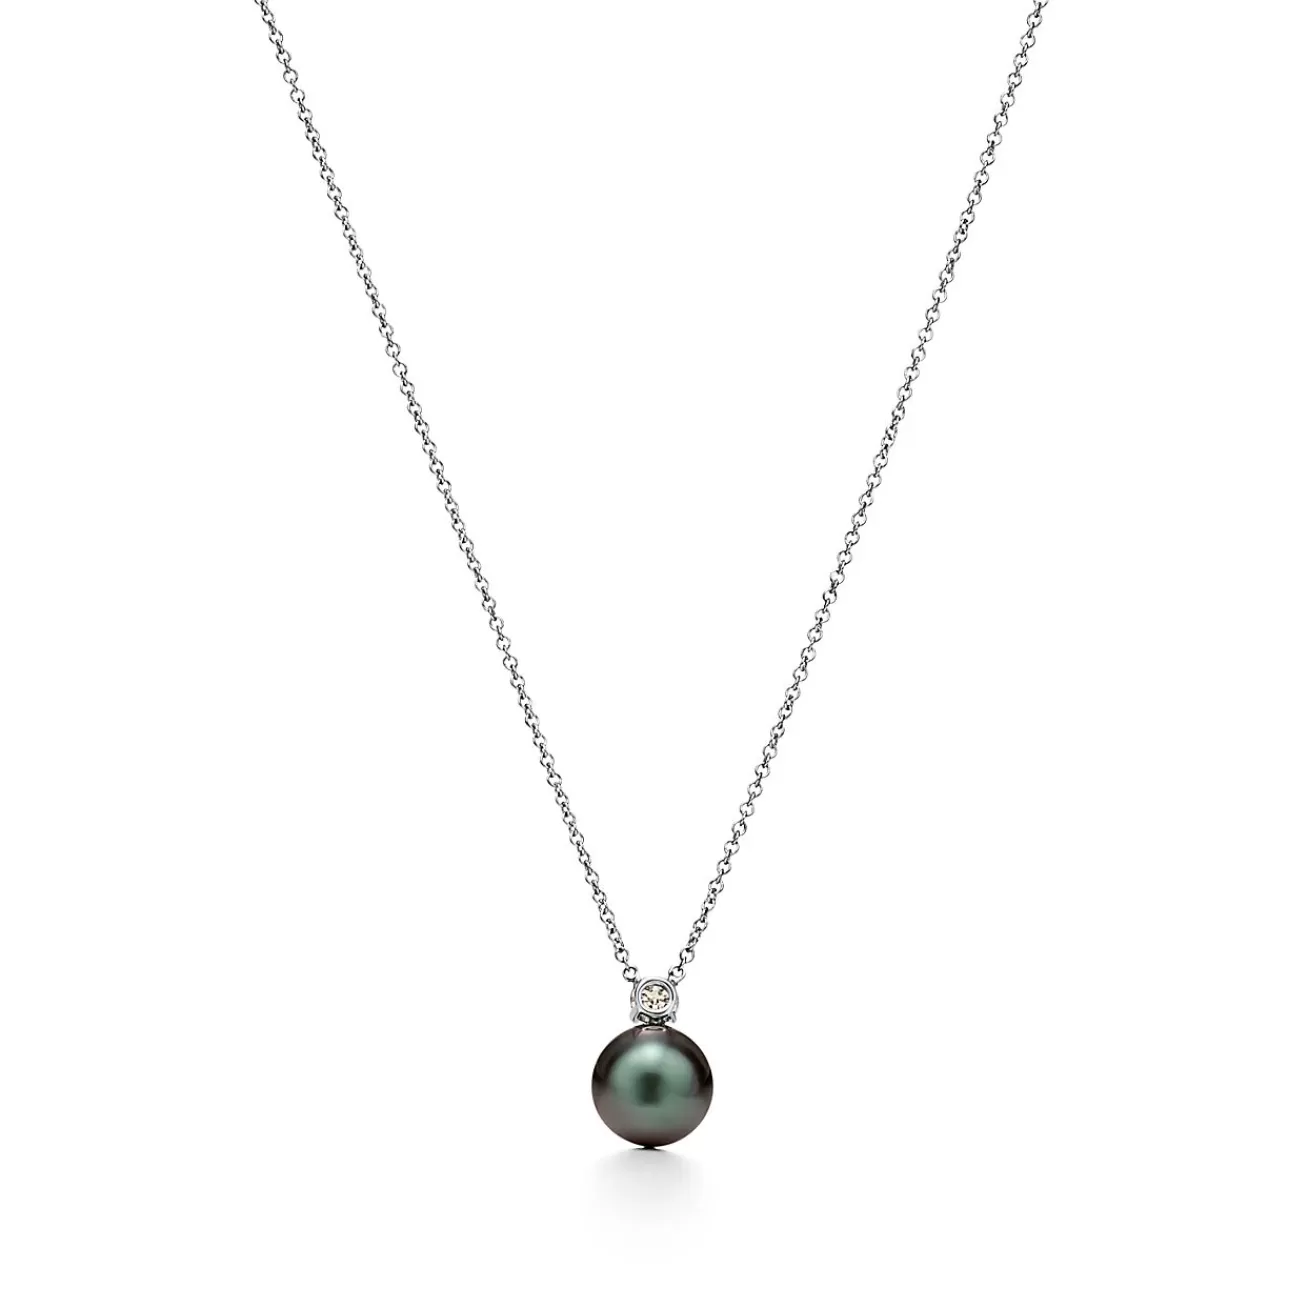 Tiffany & Co. Pendant in 18k white gold with Tahitian pearls and diamonds. | ^ Necklaces & Pendants | Pearl Jewelry